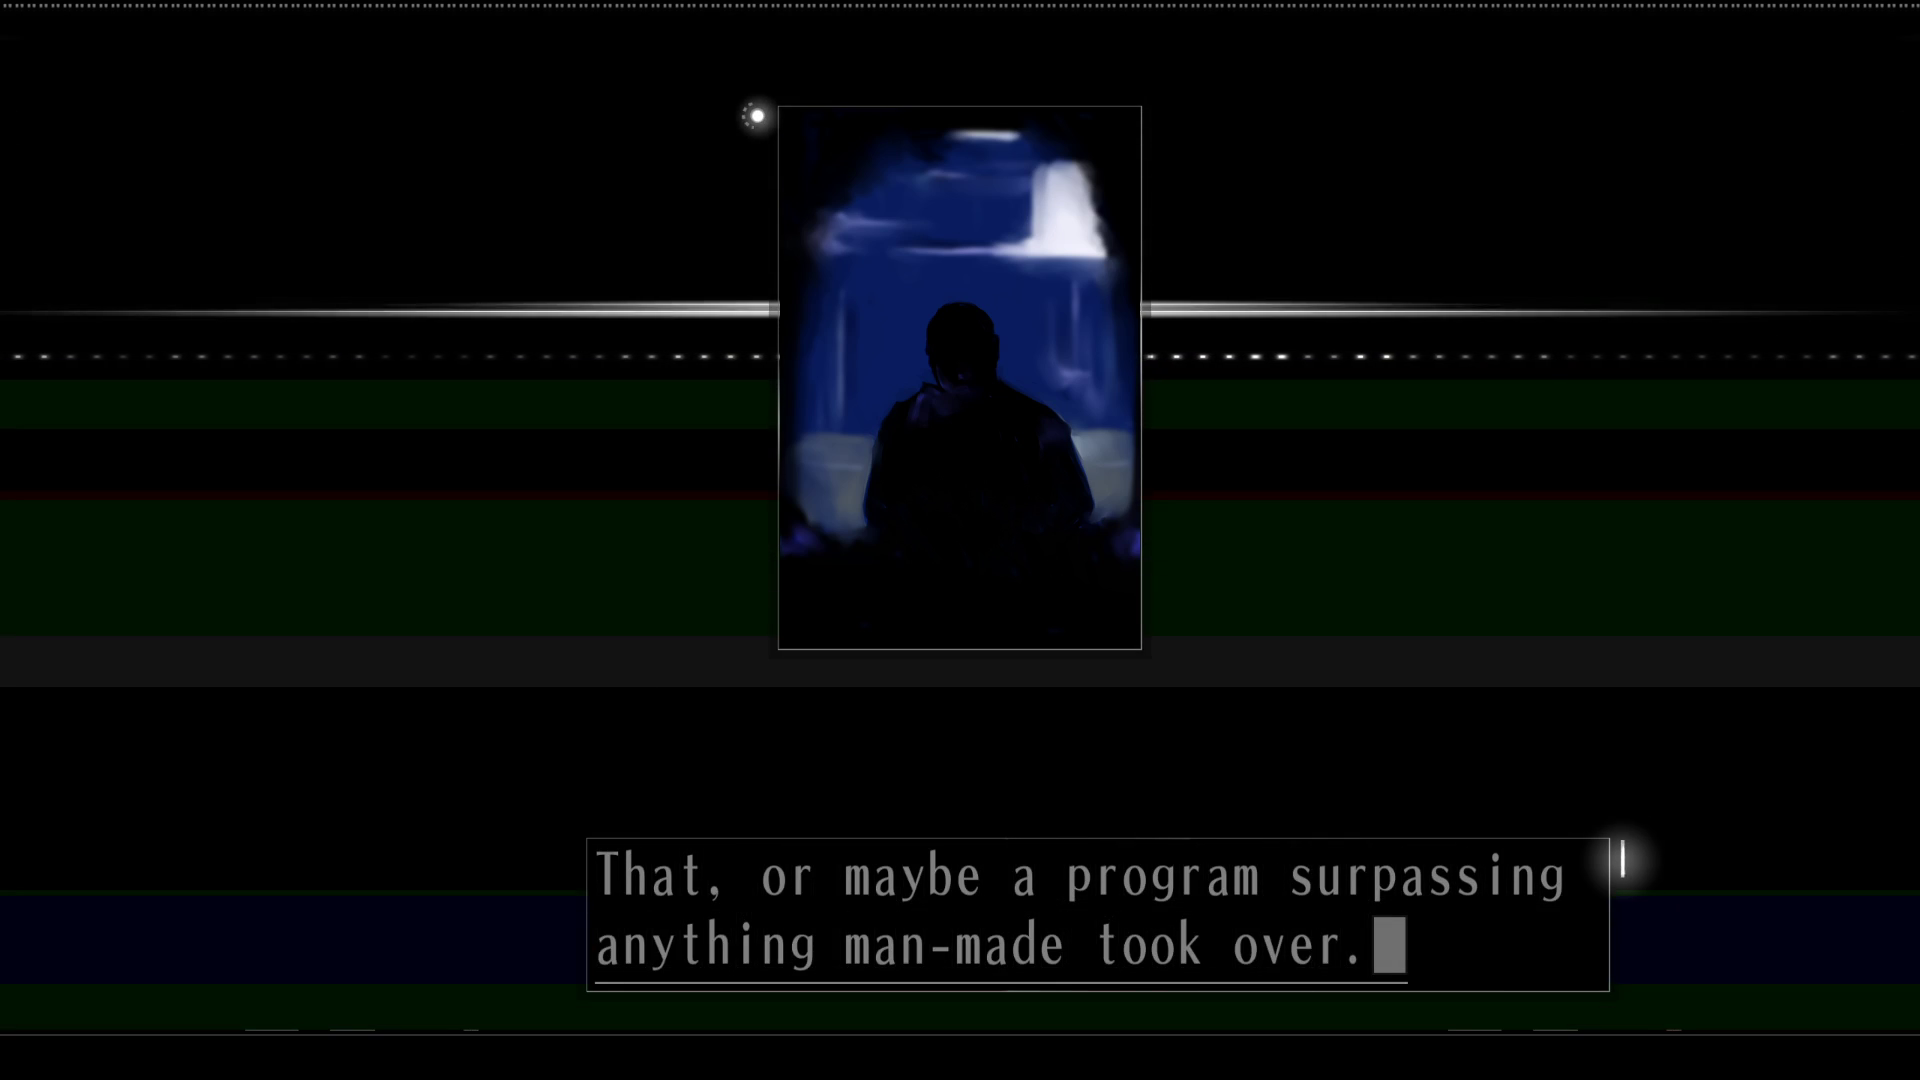 Screenshot from "HIKARI." In the narrow central window, a dark figure sits in the shadows. He says, "That, or maybe a program surpassing anything man-made took over."